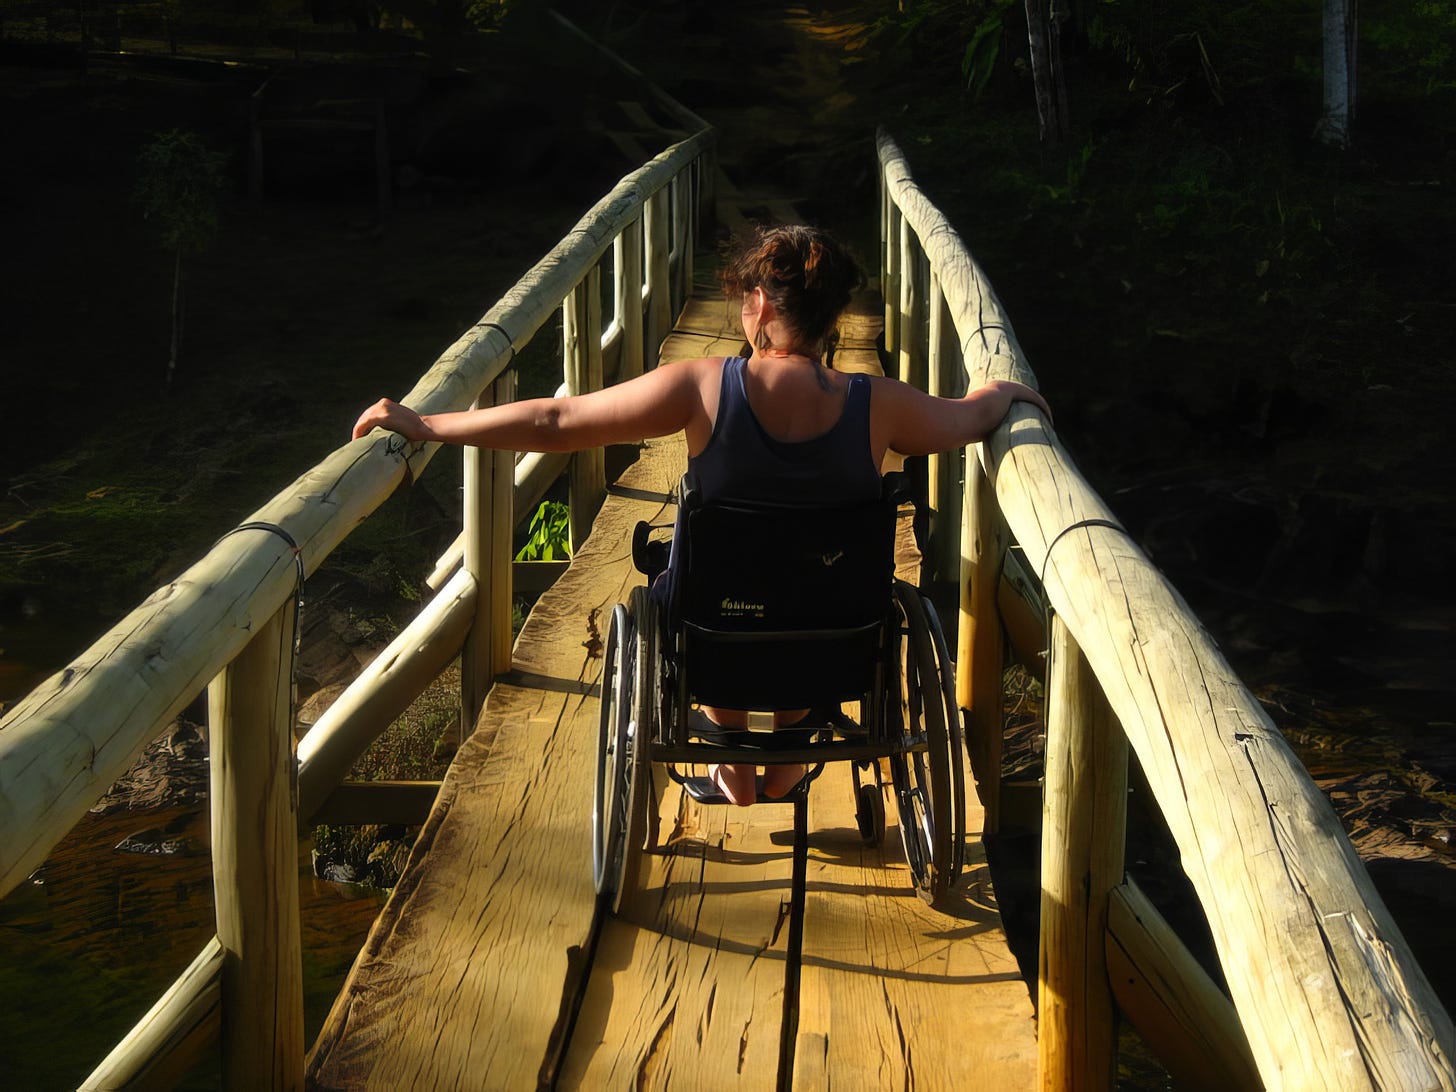 A wheelchair user viewed from the back, crossing a small rickety pedestrian bridge.